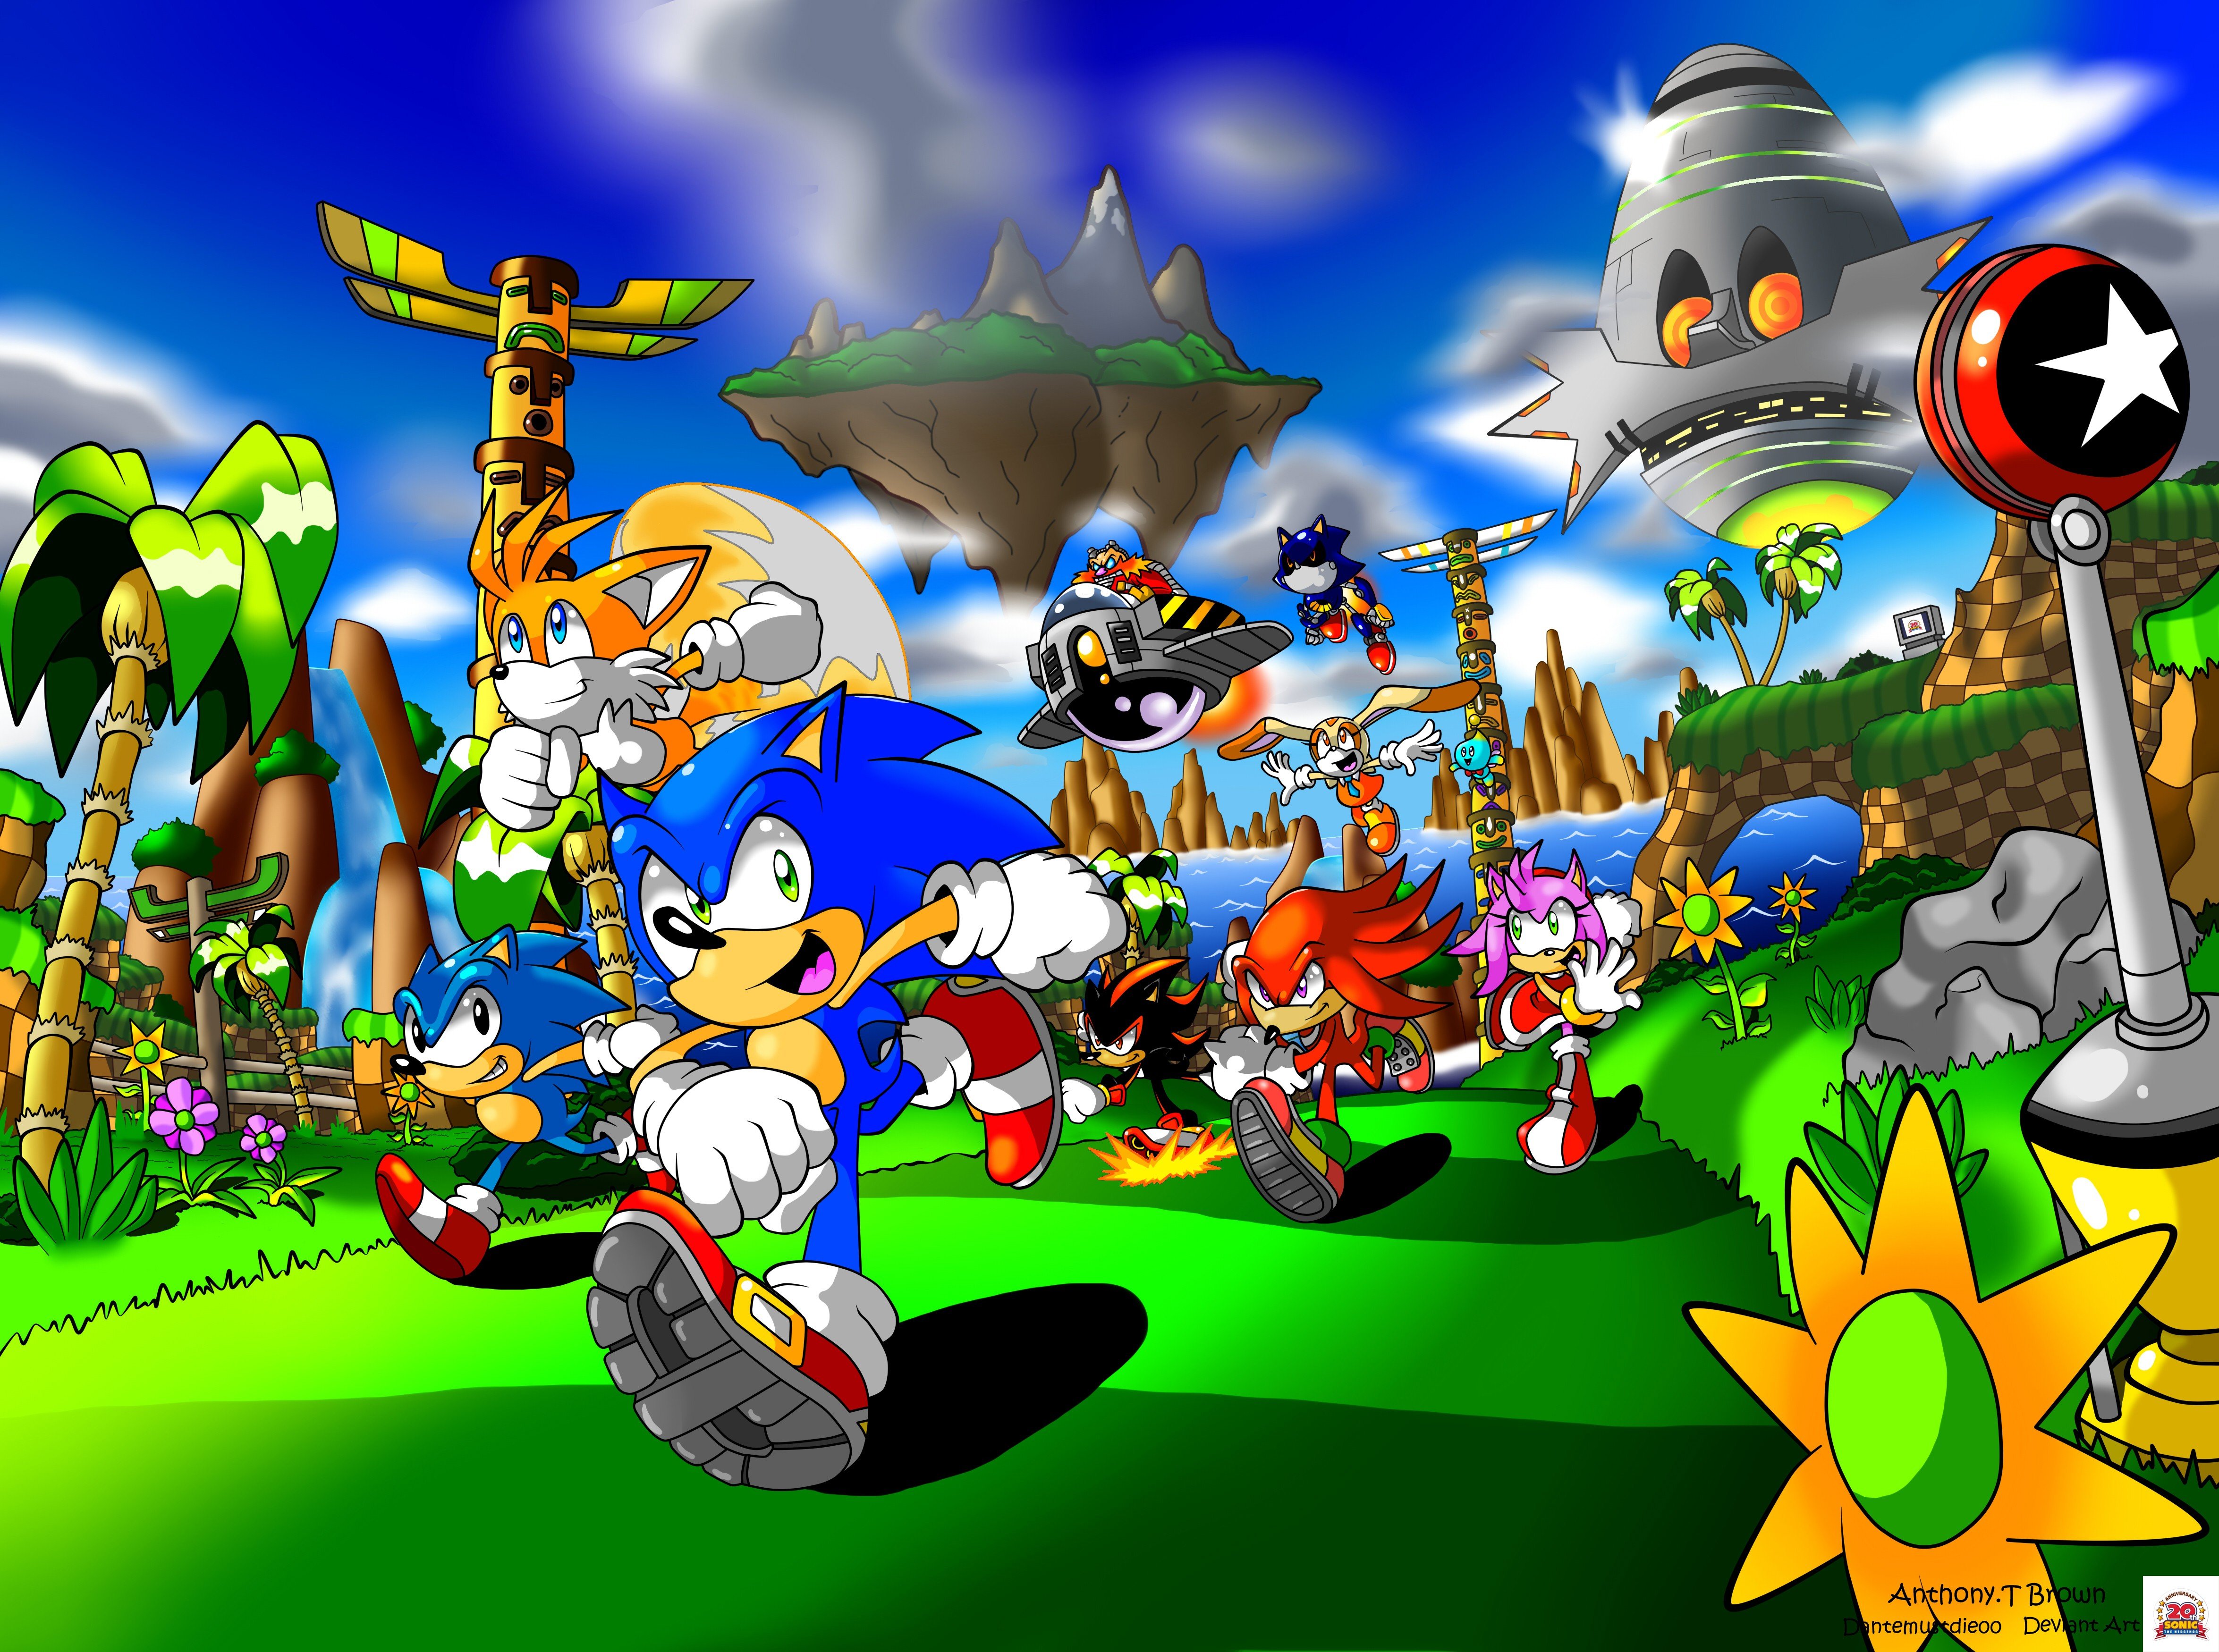 Tails (character), Sonic, Sonic the Hedgehog, Metal Sonic, Shadow the Hedgehog, Knuckles Wallpaper